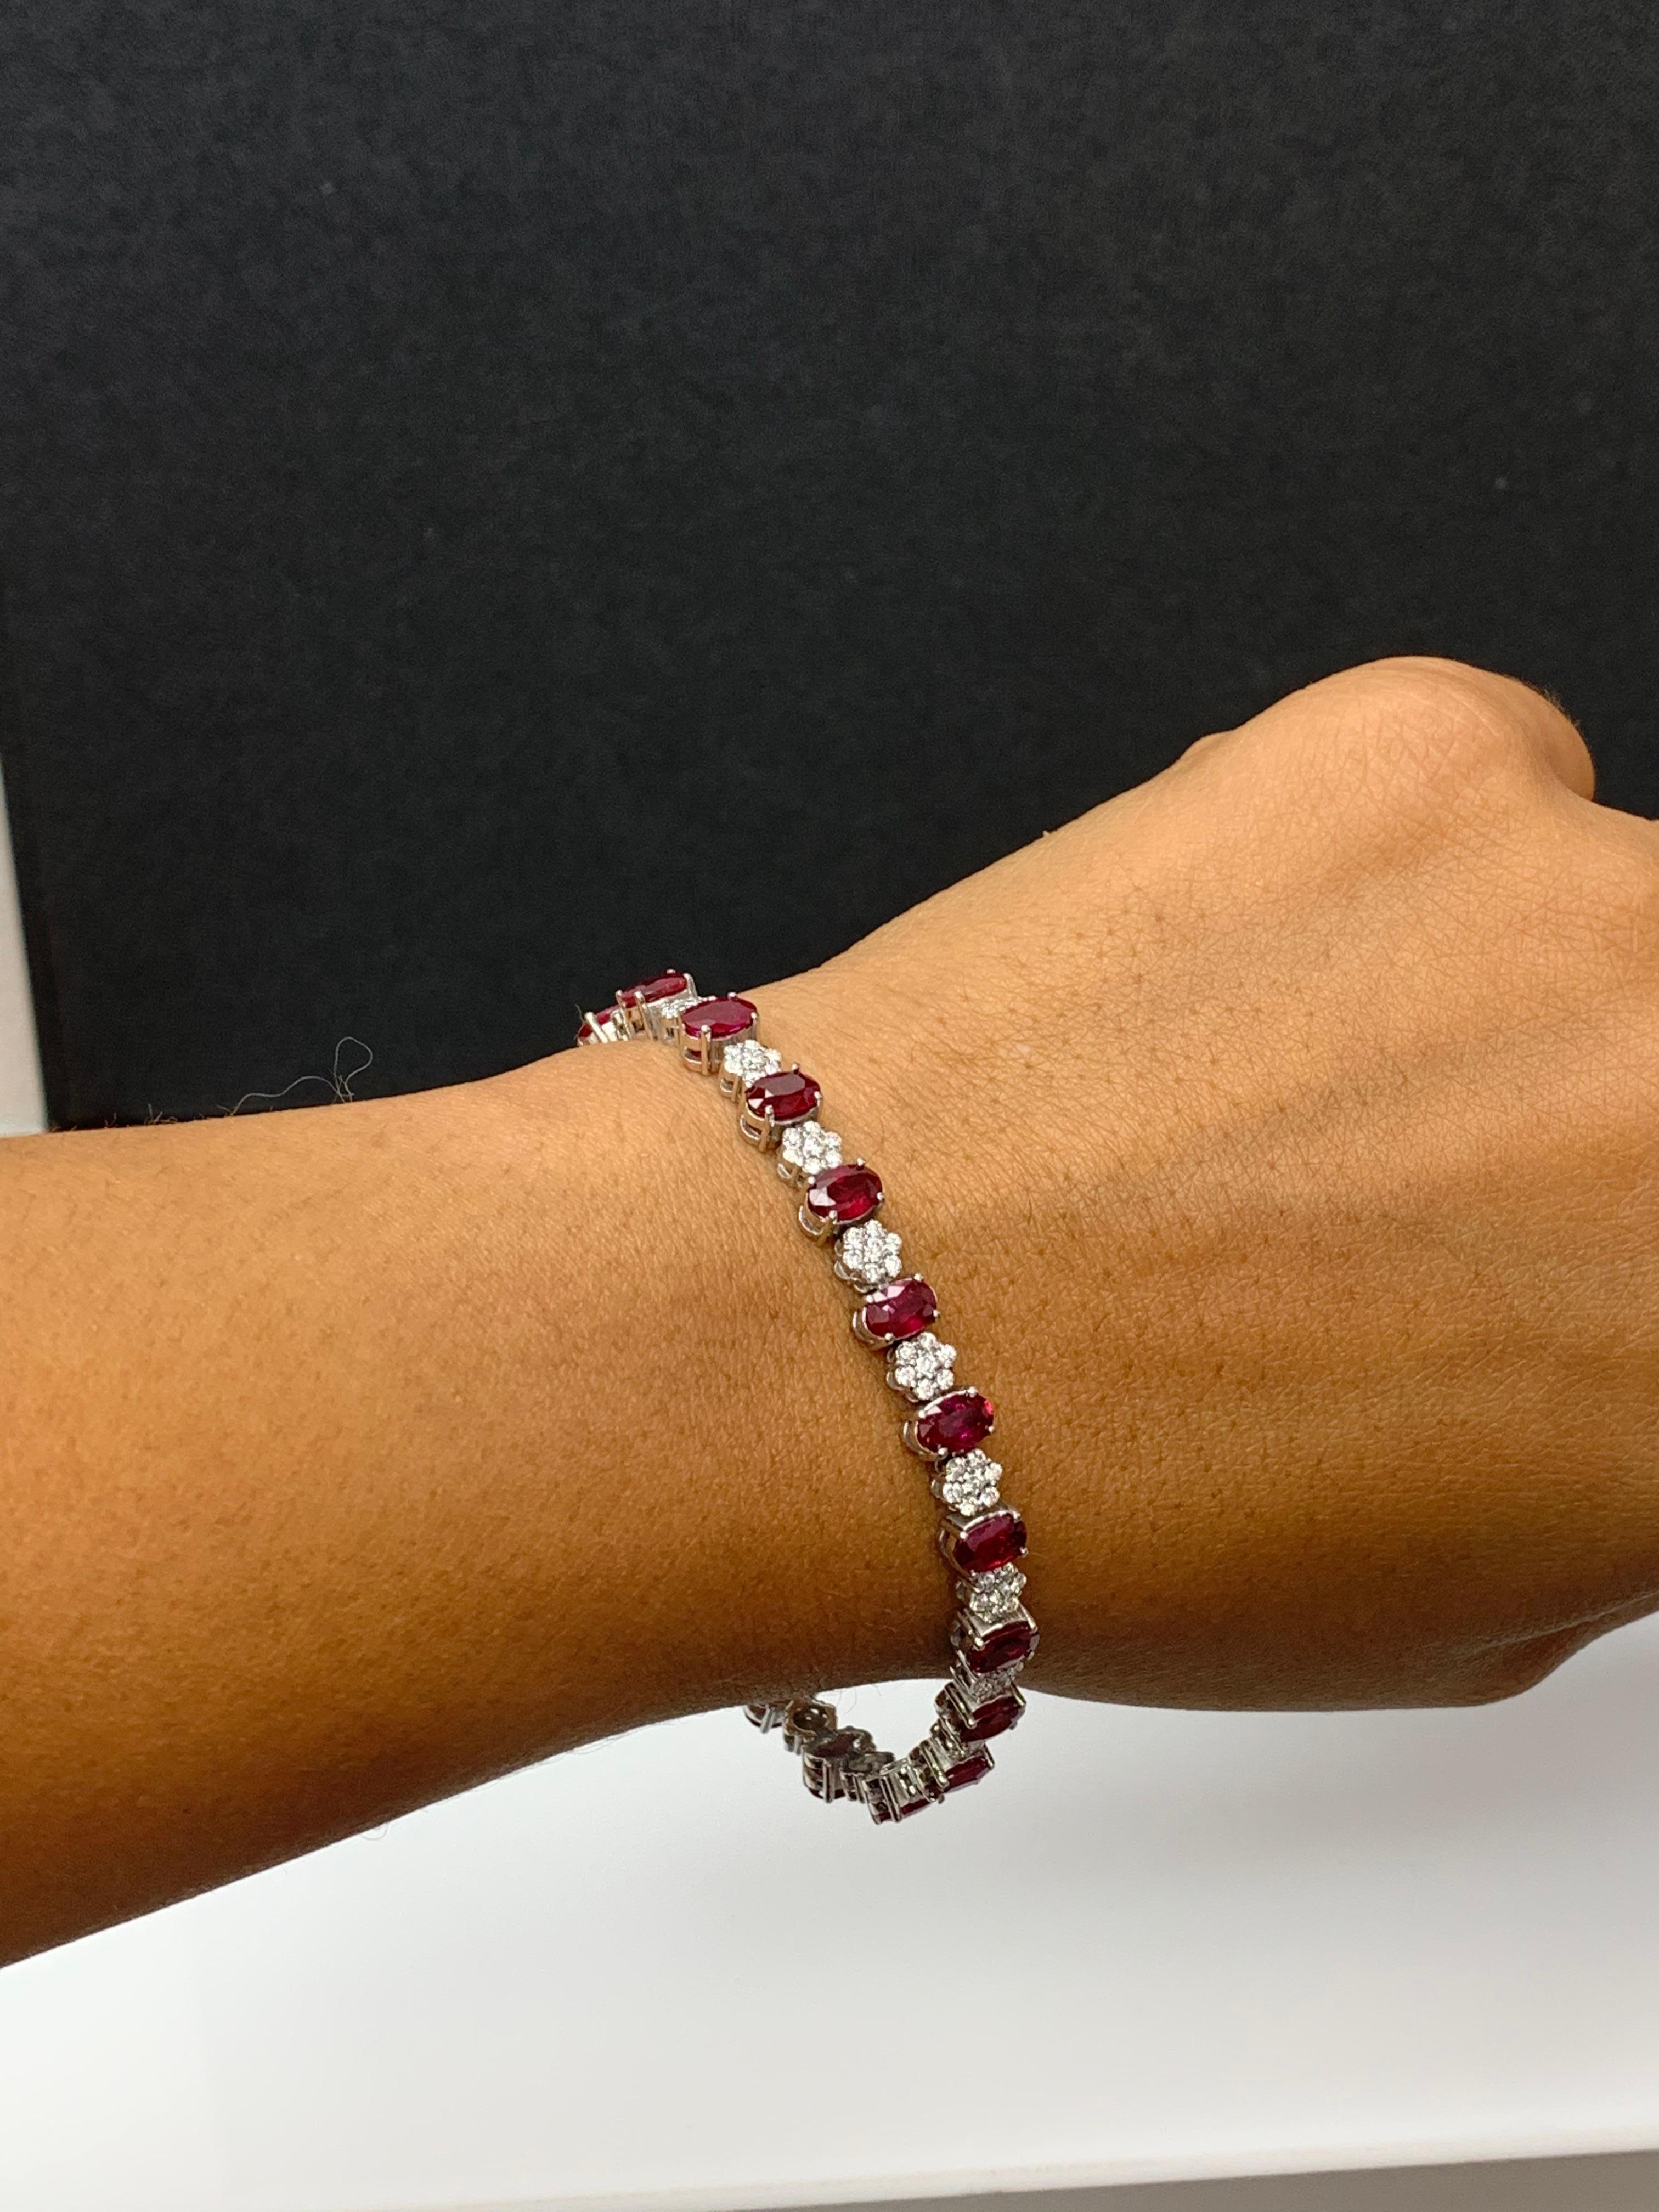 10.34 Carat Oval Cut Ruby and Diamond Tennis Bracelet in 14K White Gold For Sale 11